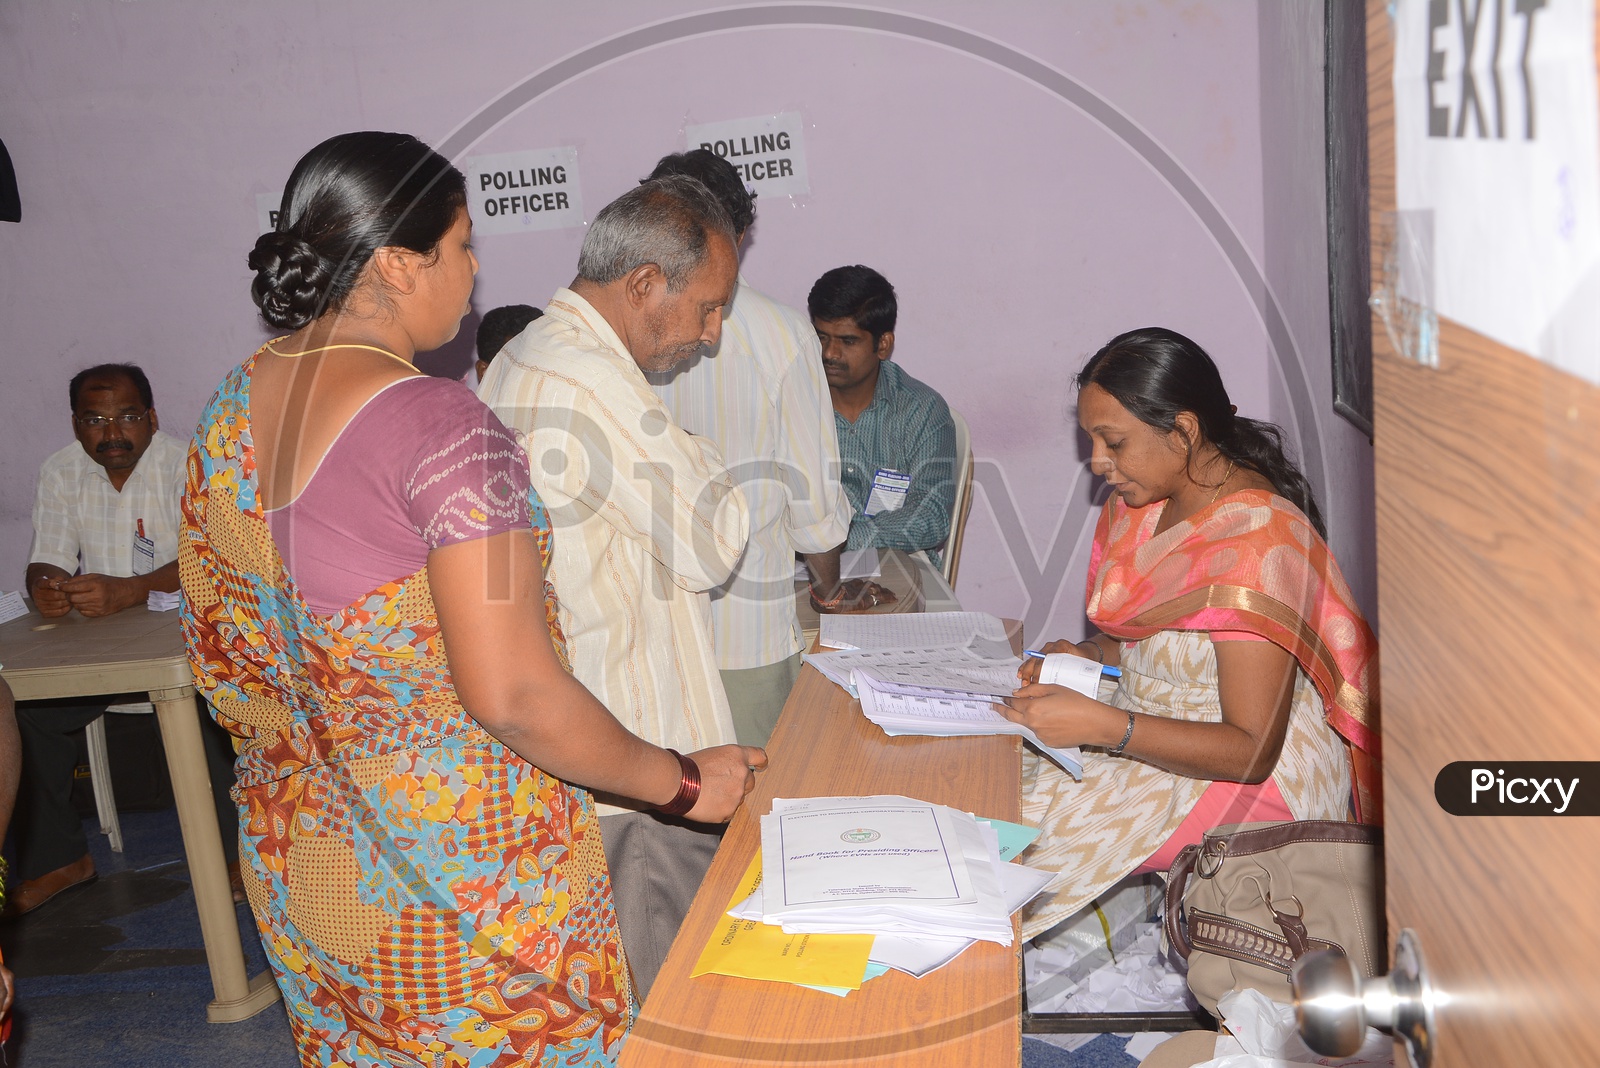 Voters Voting In a Polling Booth With Election Officers Checking Credentials